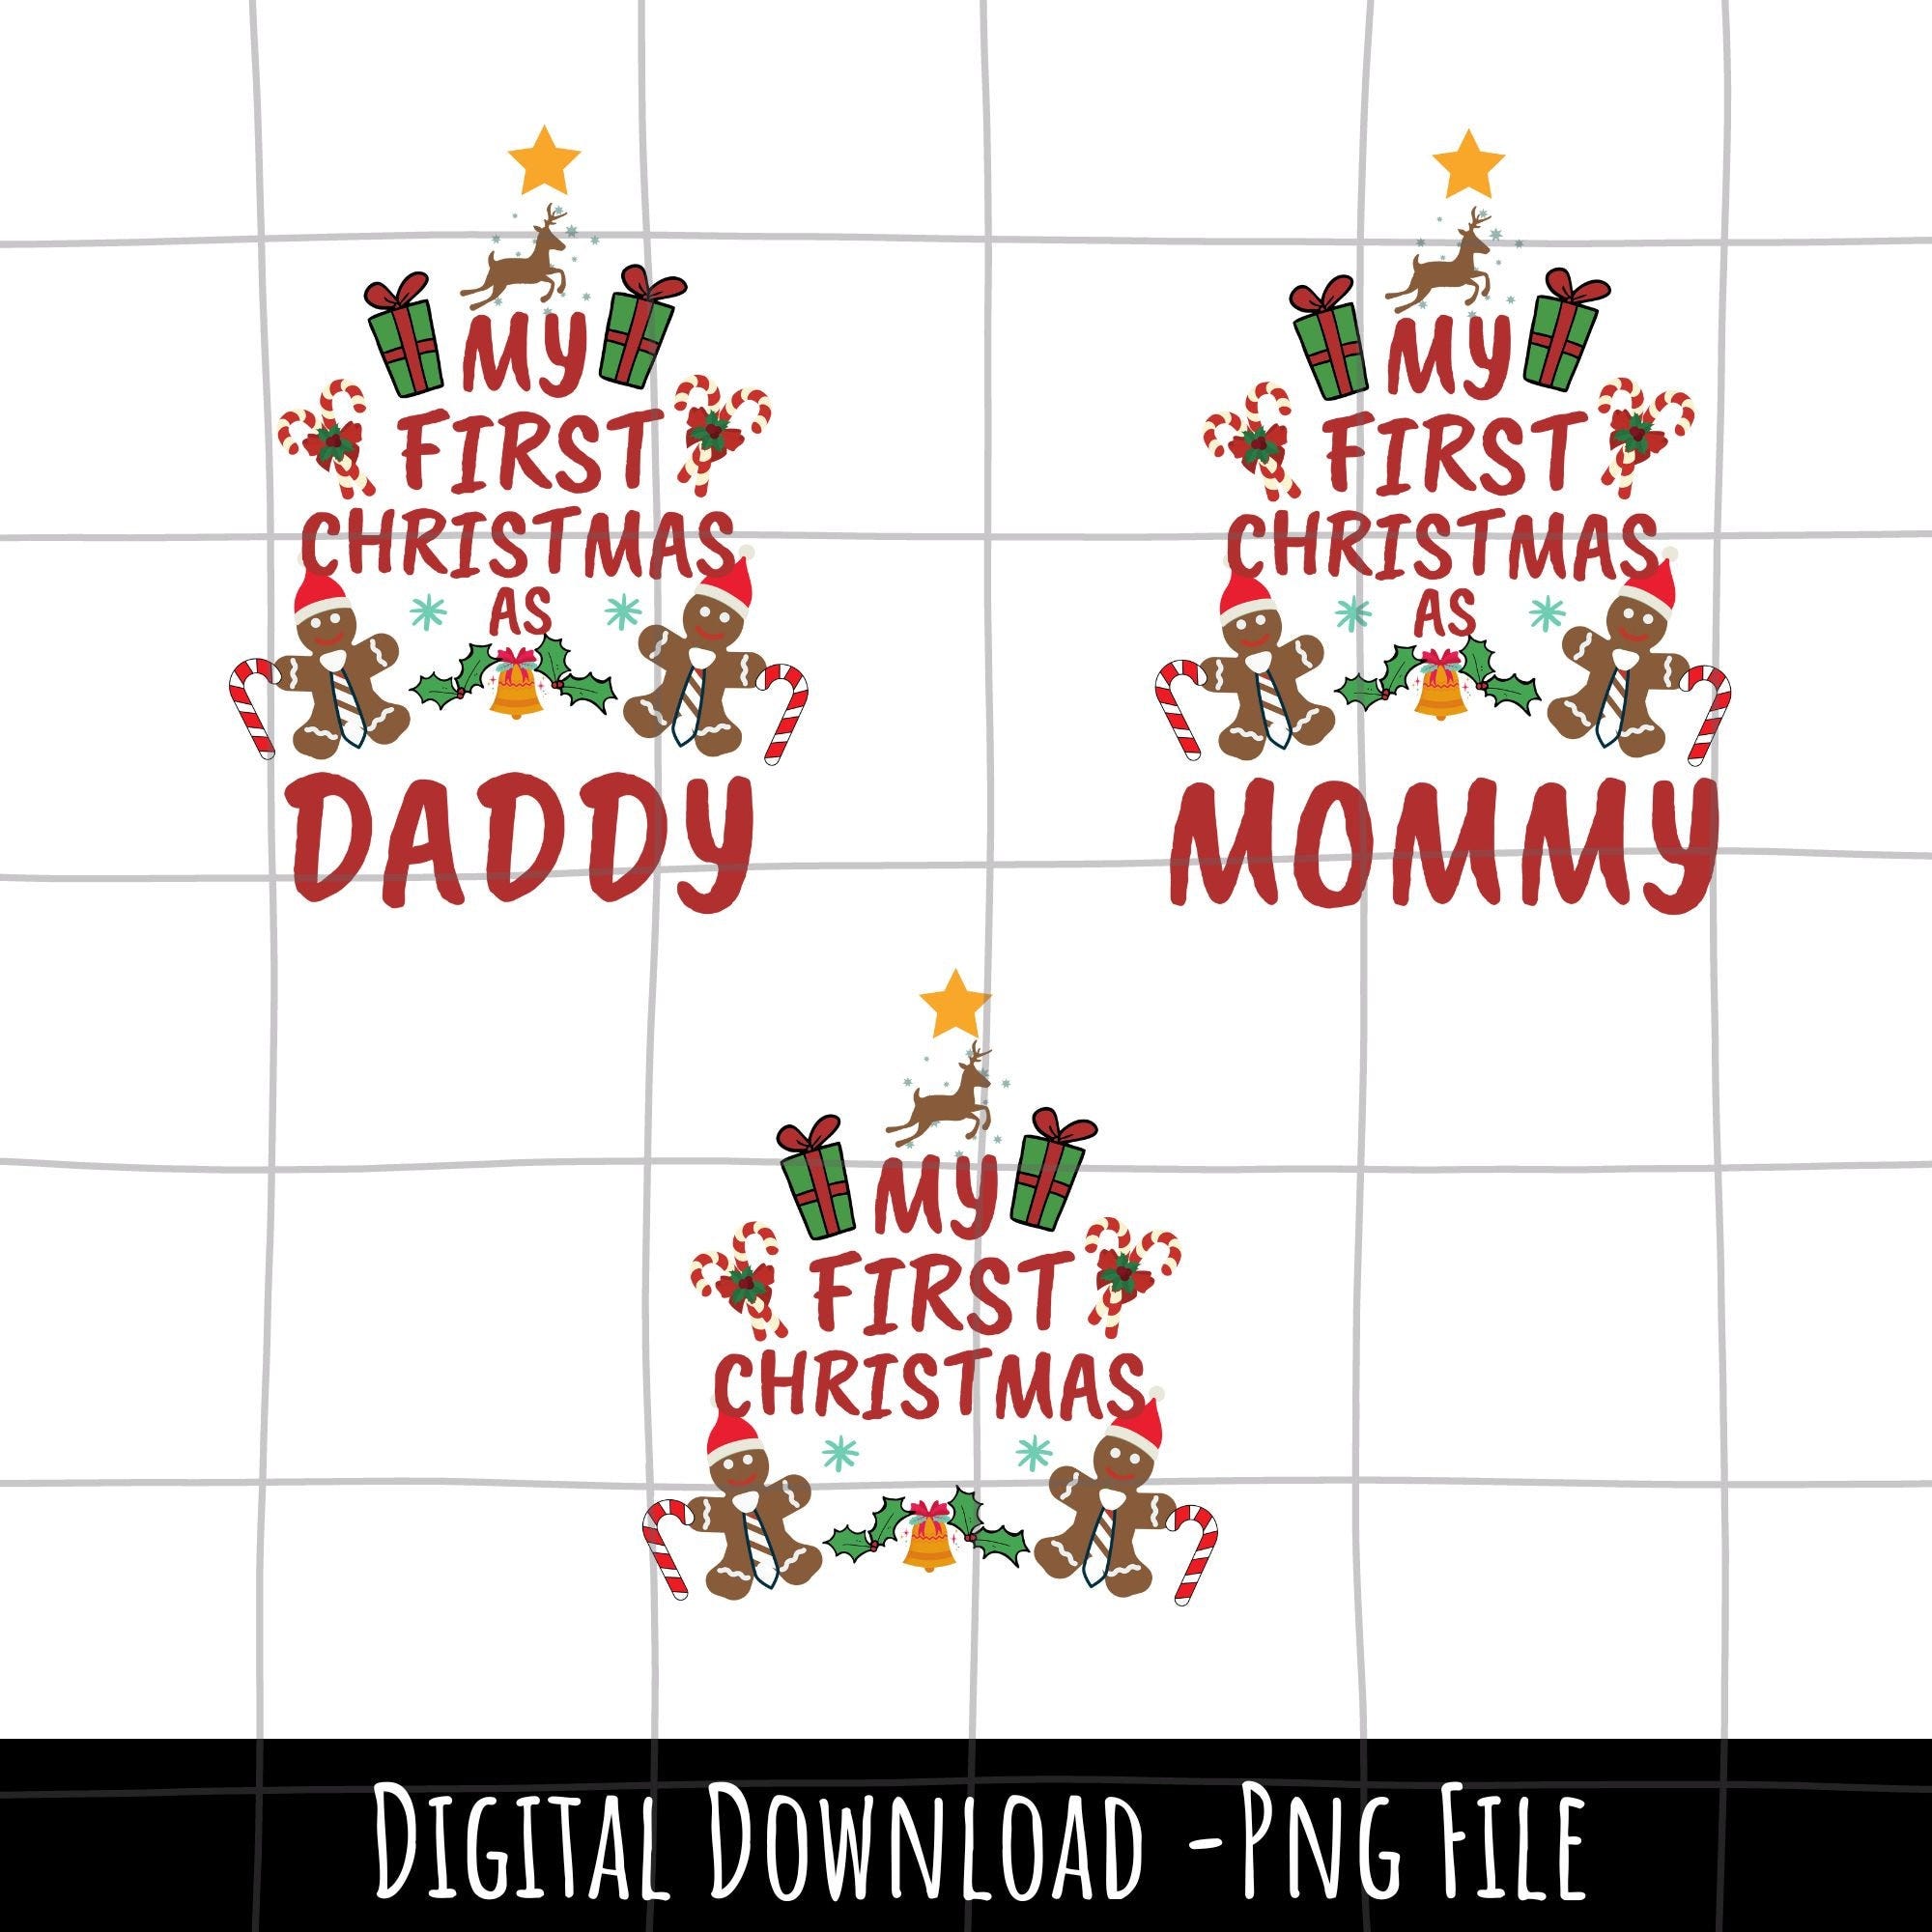 My First Christmas png, First Christmas As Mommy, First Christmas As Daddy png, 1st Christmas Family Bundle png, first christmas family png